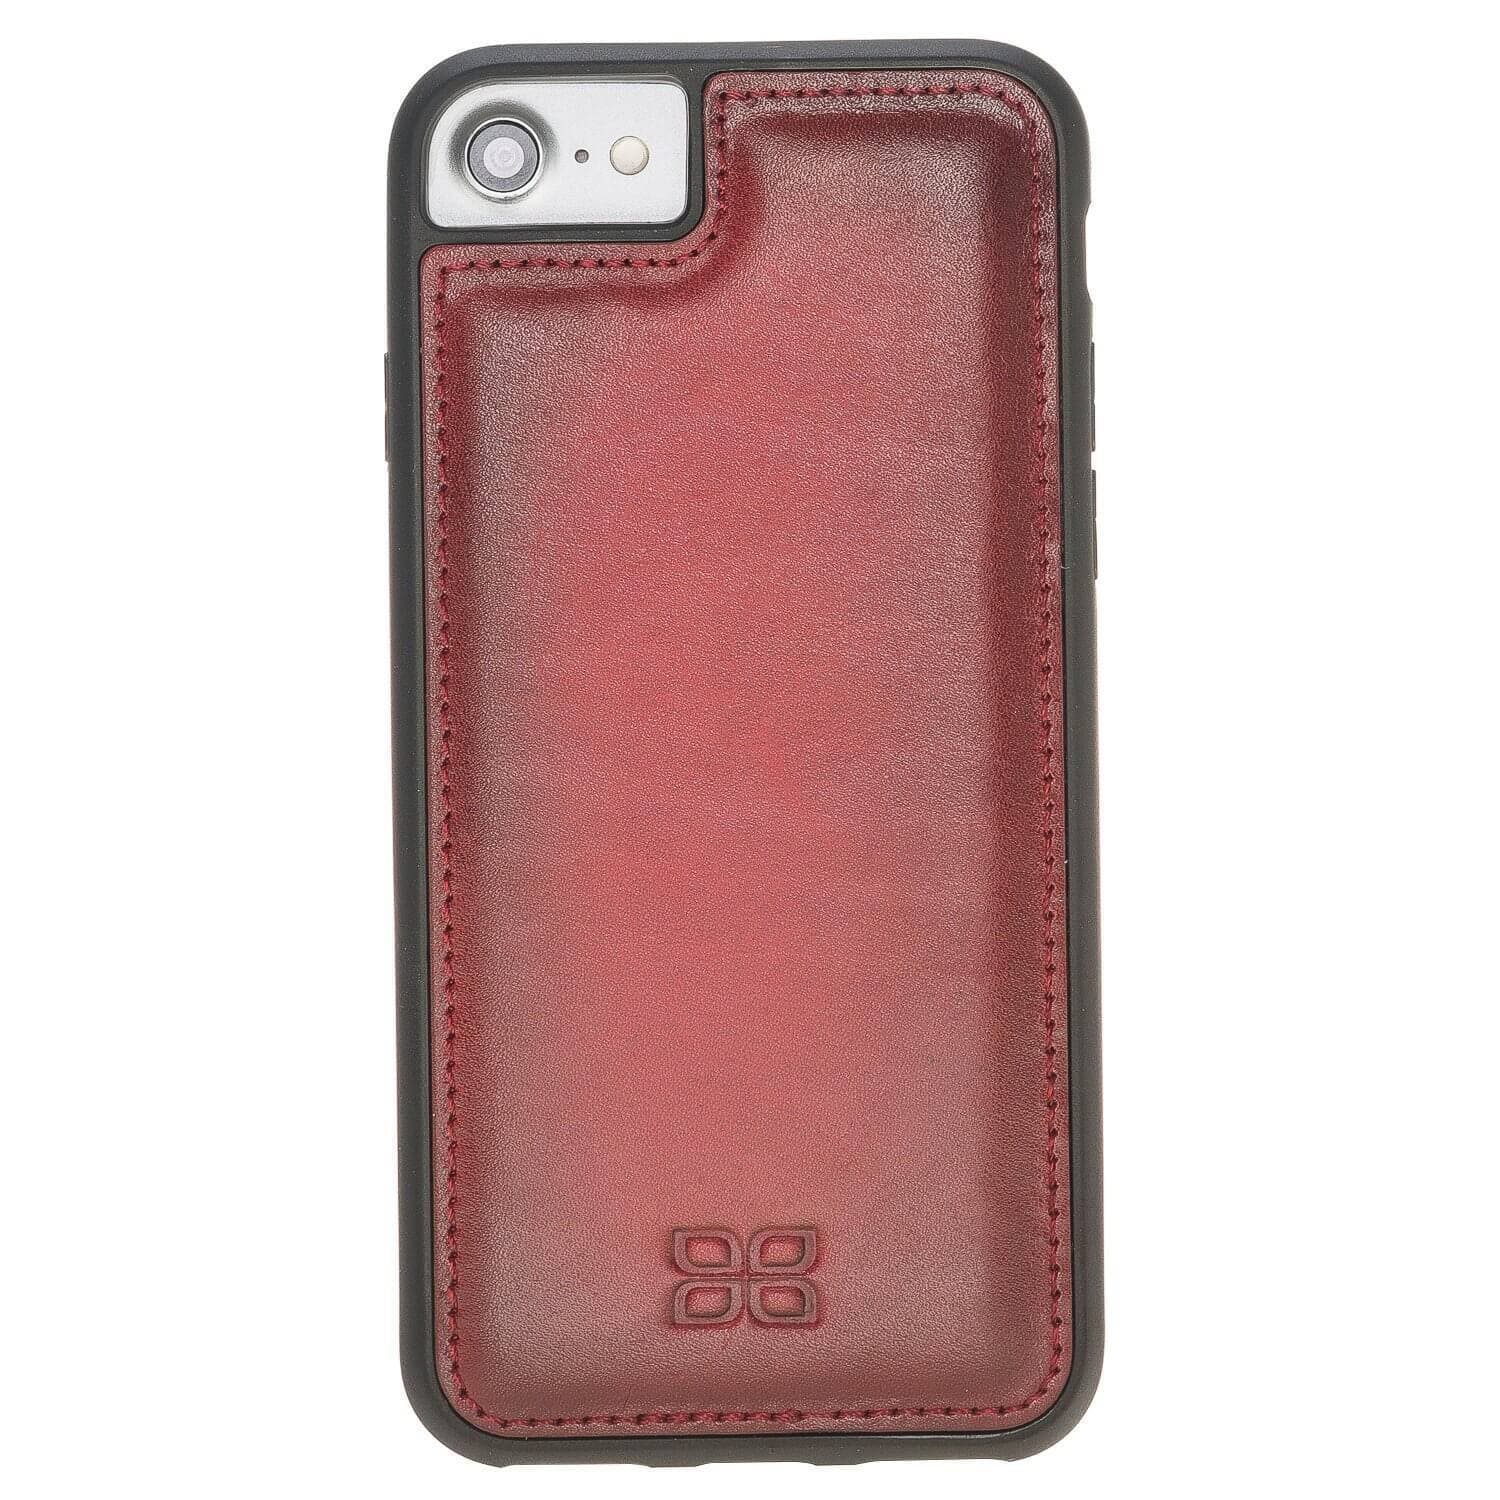 Flexible Genuine Leather Back Cover for Apple iPhone 7 Series iPhone 7 / Vegetal Red Bouletta